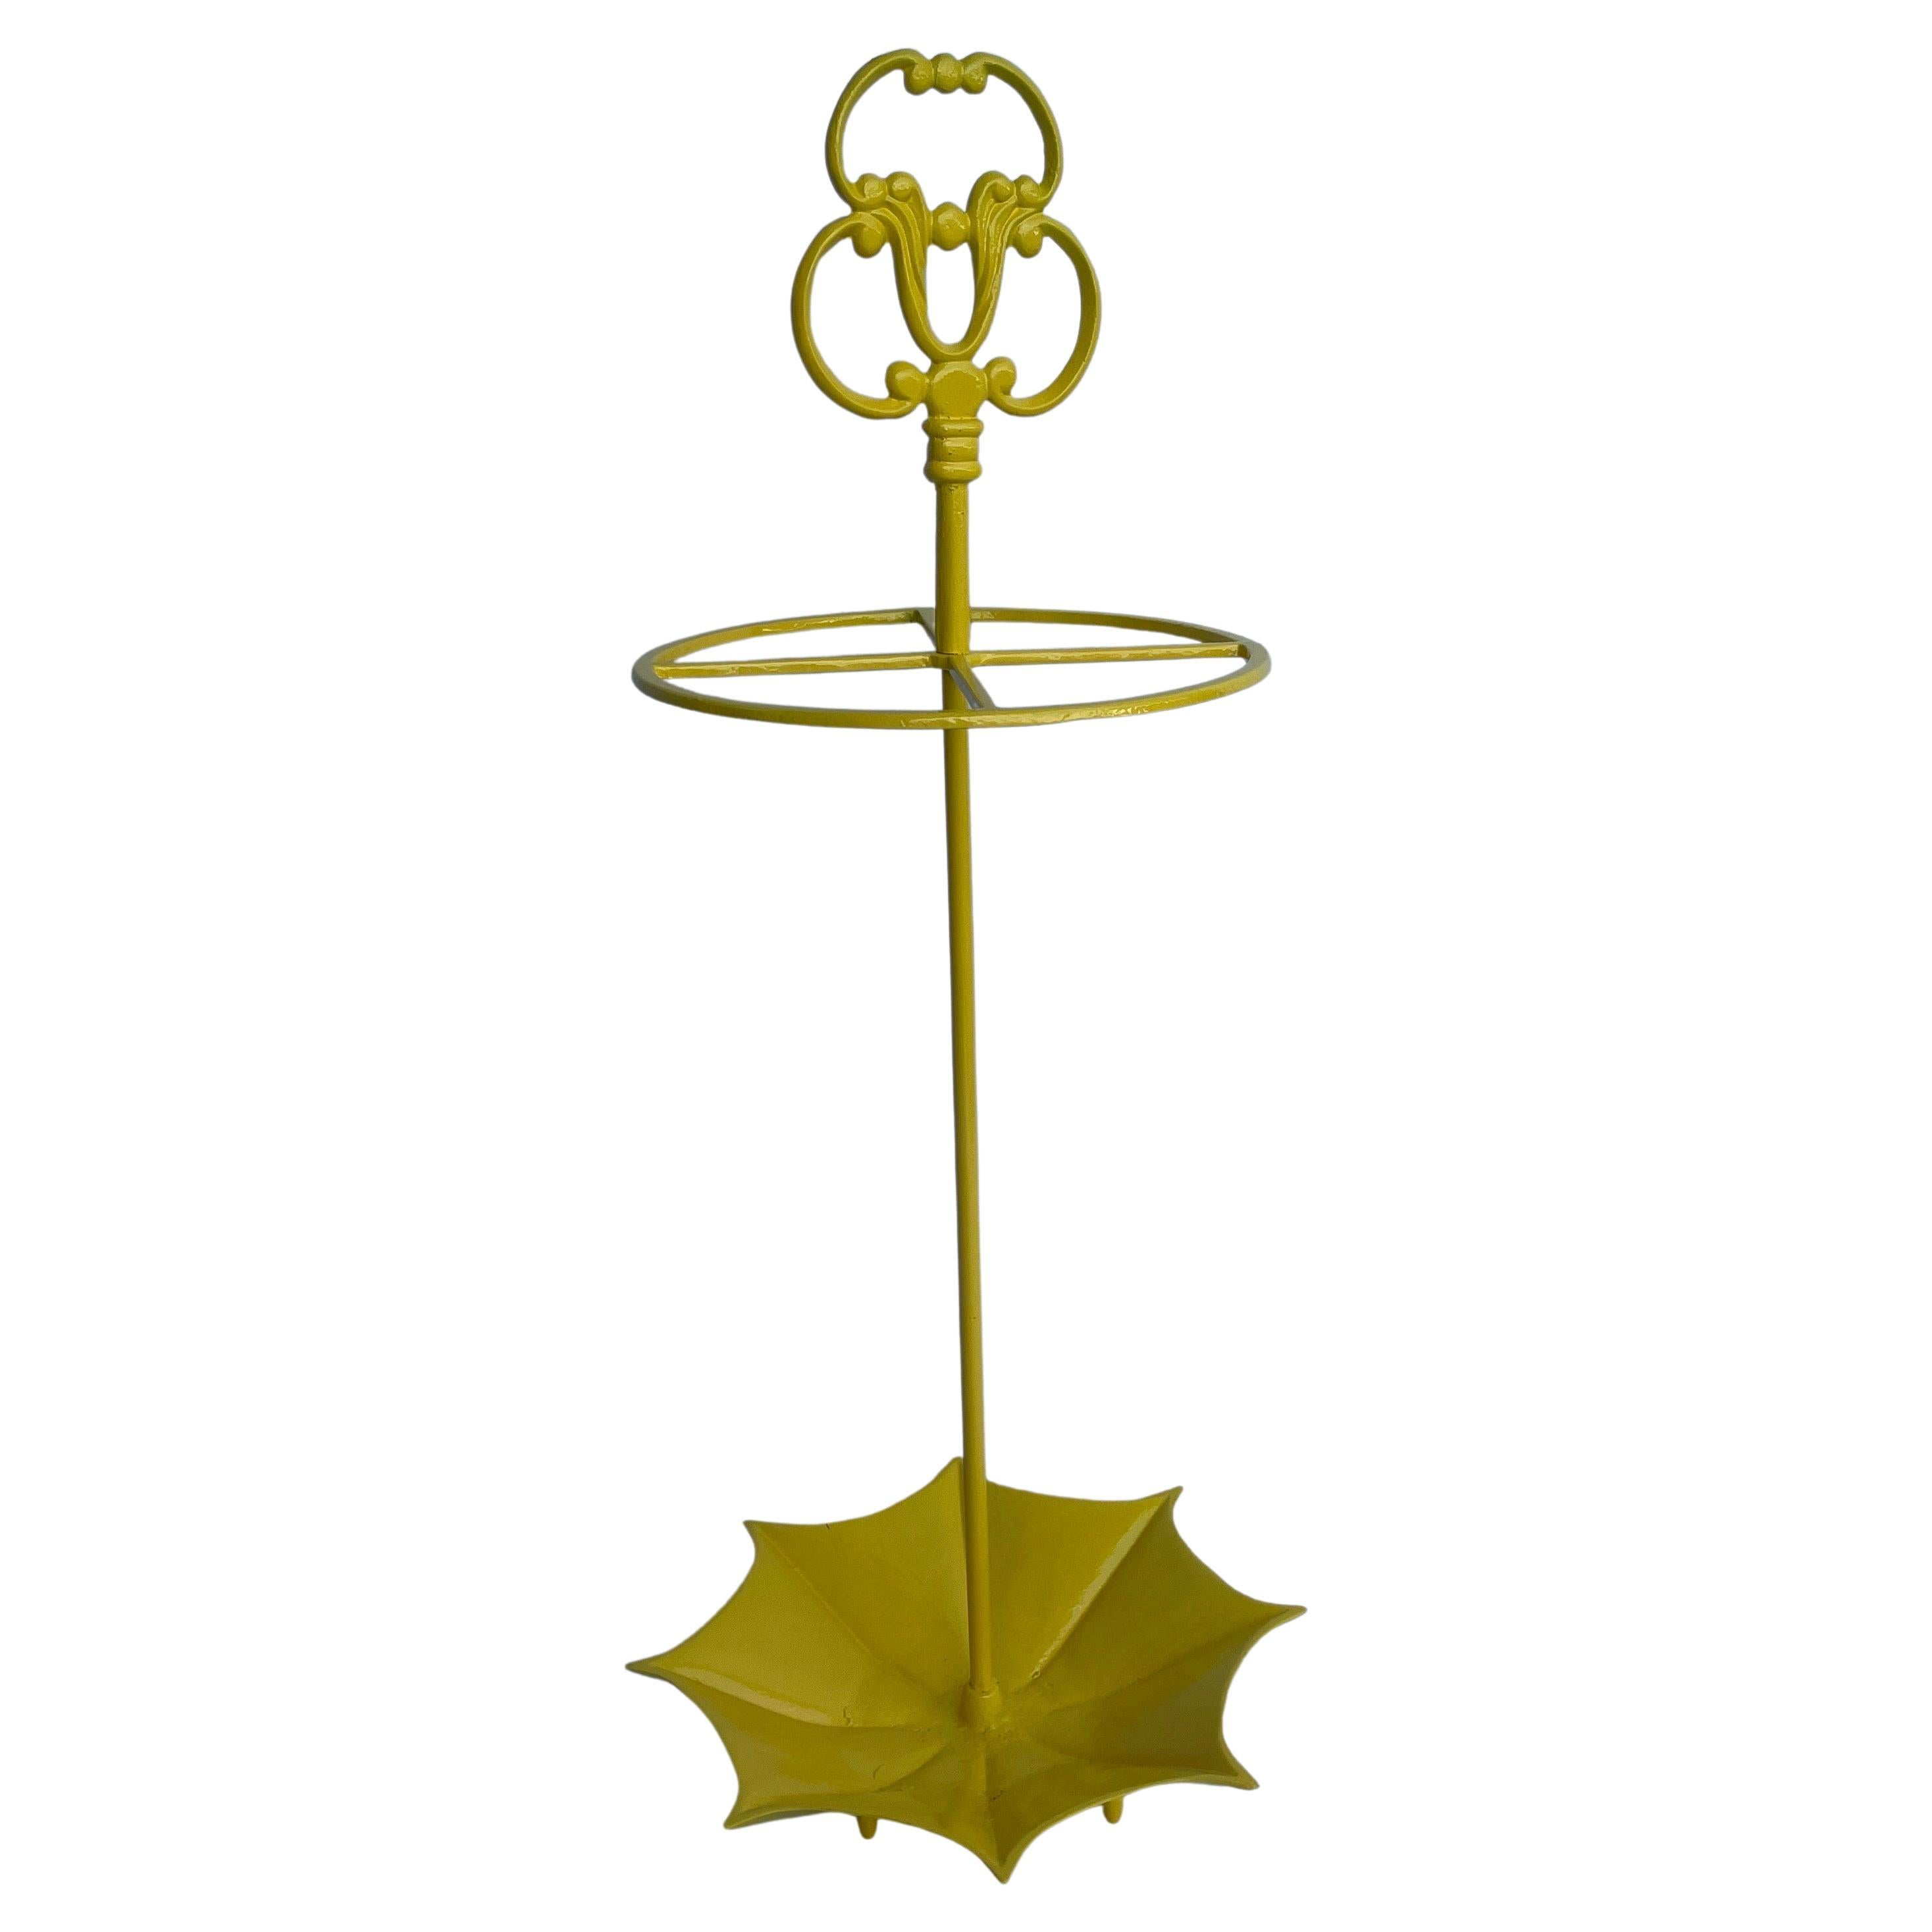 Powder-Coated Yellow Umbrella Stand Holder, MCM

Substantial vintage metal umbrella stand in newly powder-coated Sunshine Yellow. This is a perfect sturdy piece to be used by the front door as well as mud room area. This also makes a wonderful